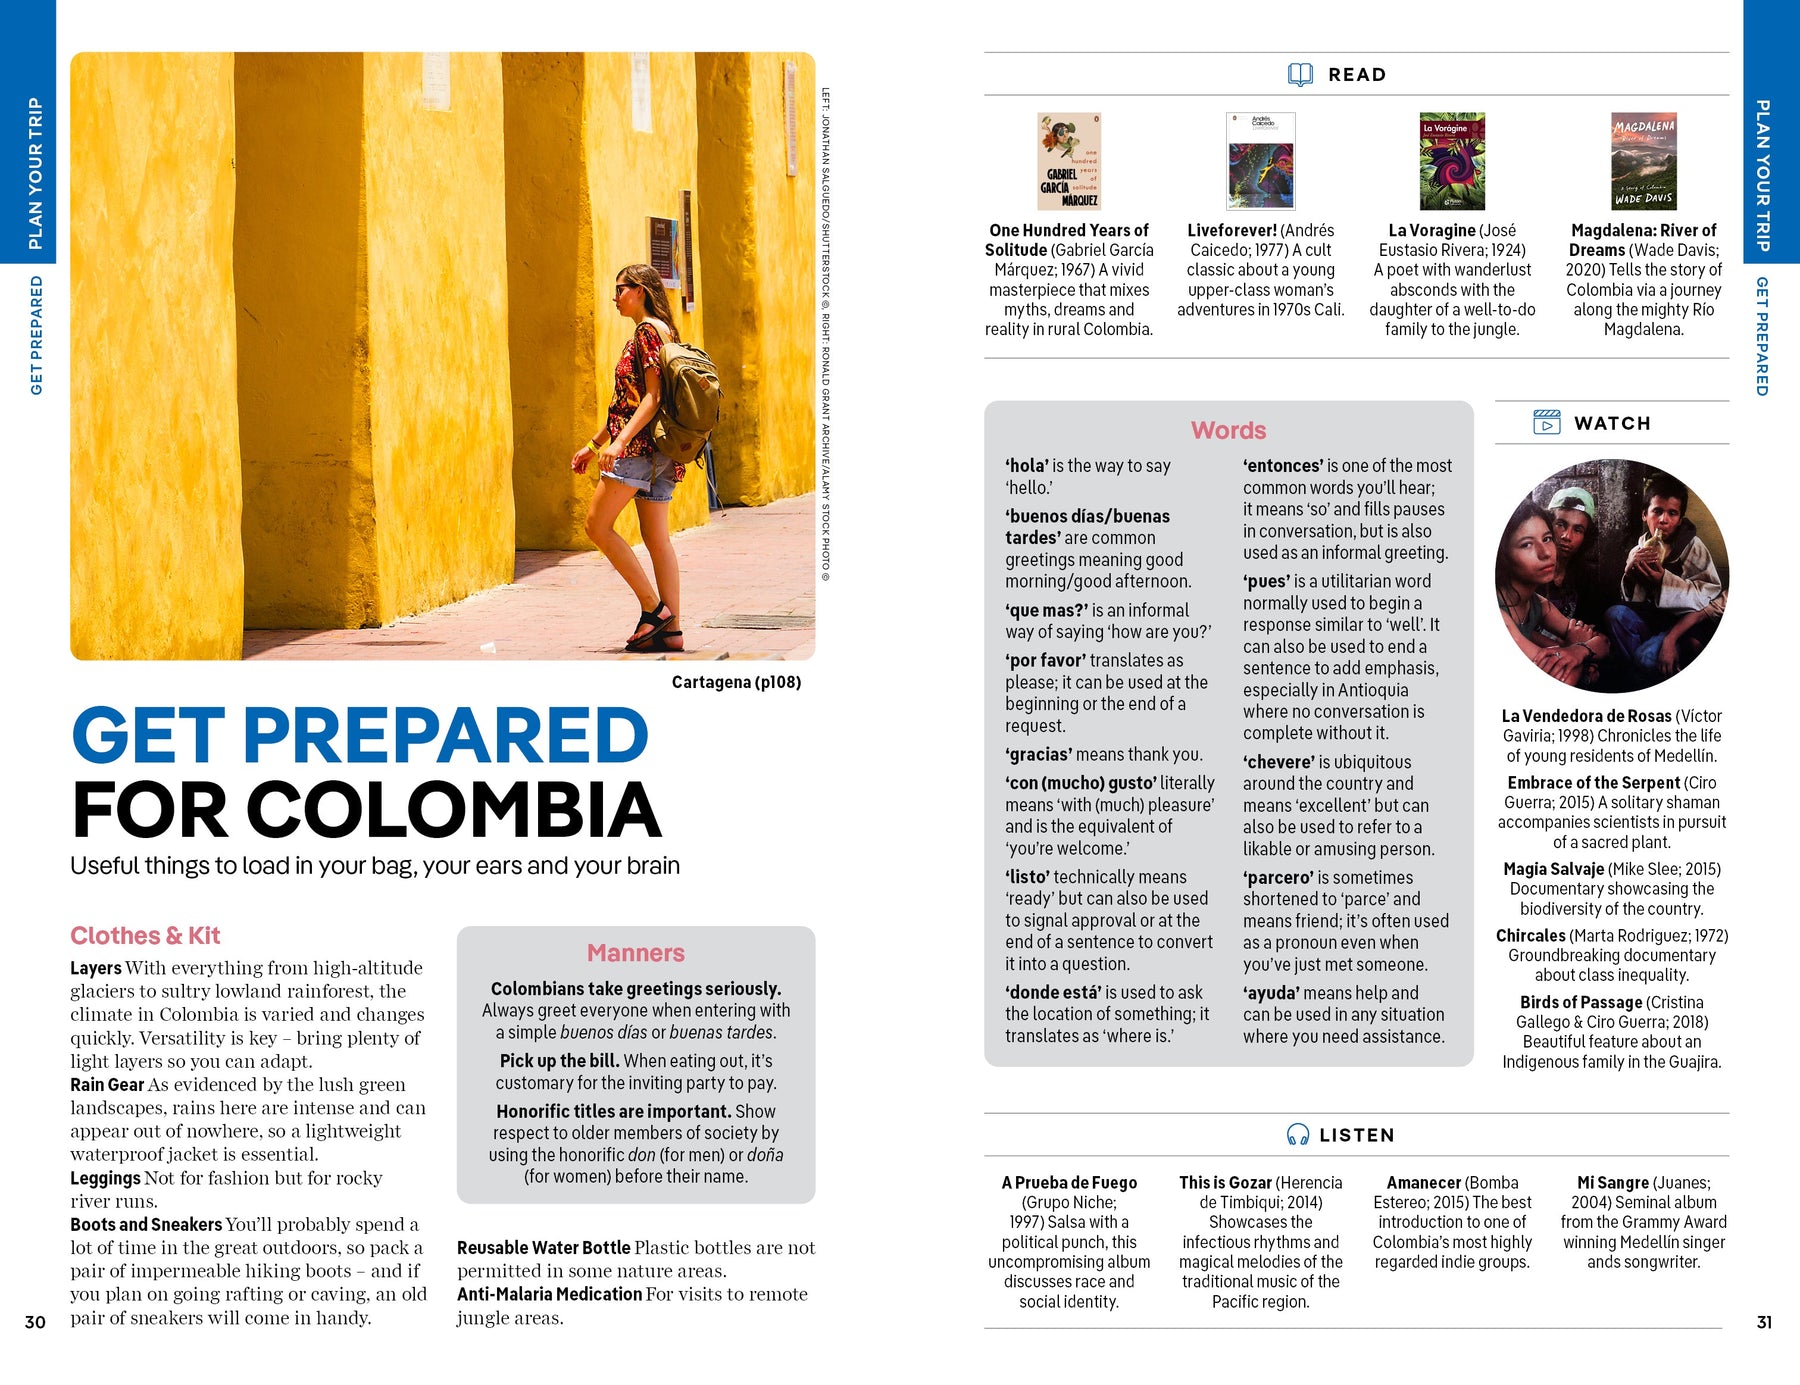 Colombia preview